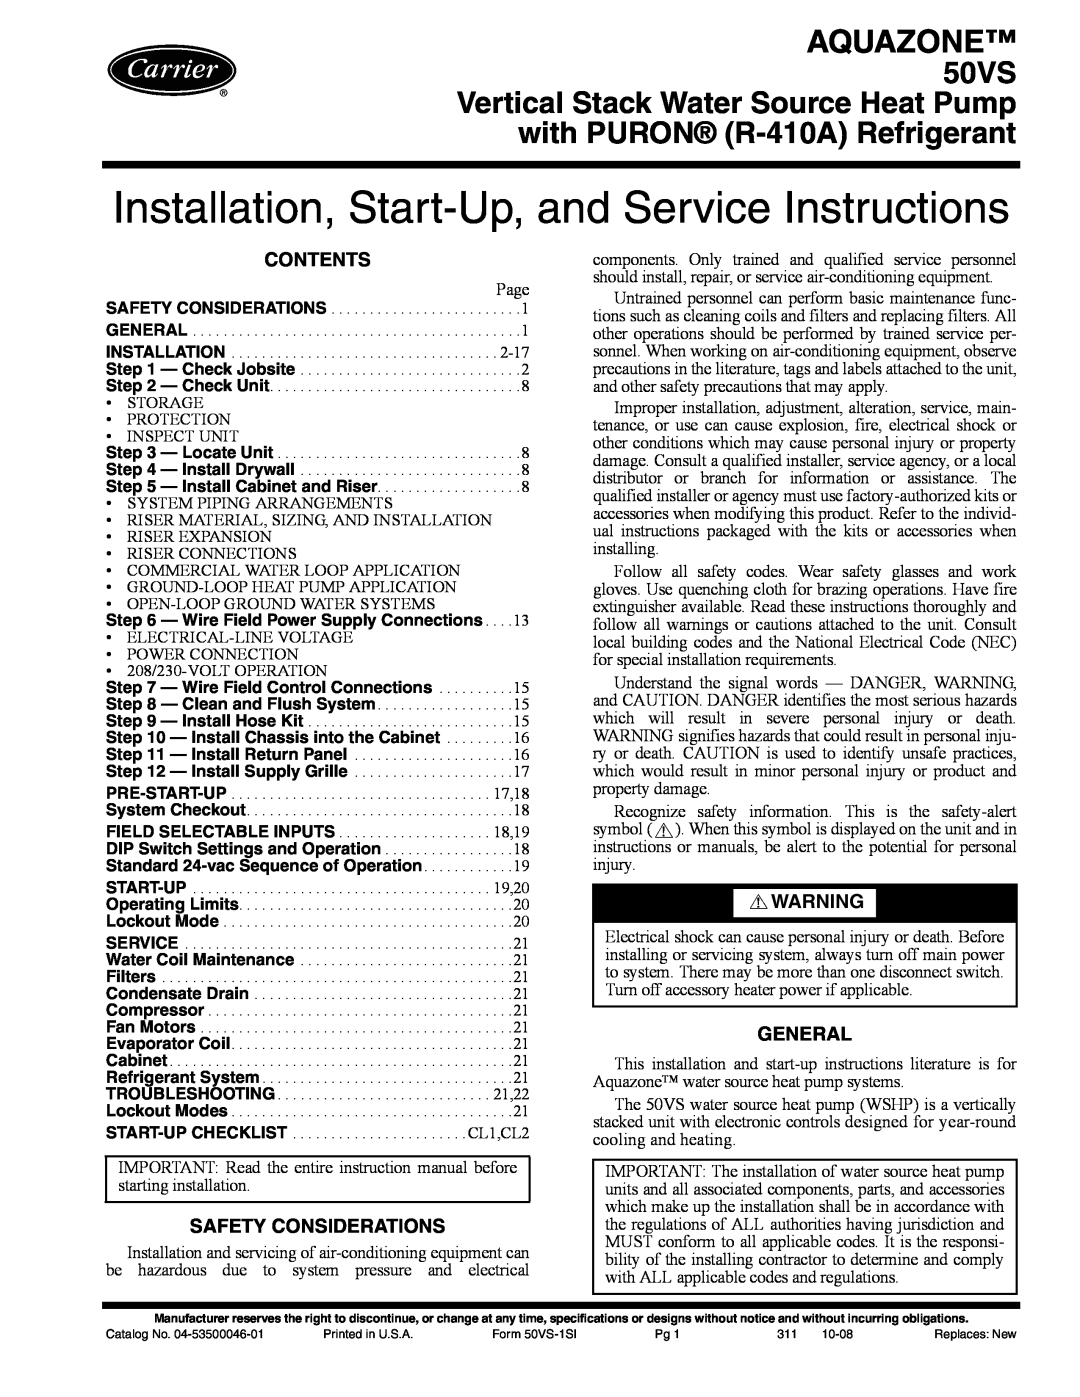 Carrier 50VS specifications Contents, Safety Considerations, General, Installation, Start-Up,and Service Instructions 